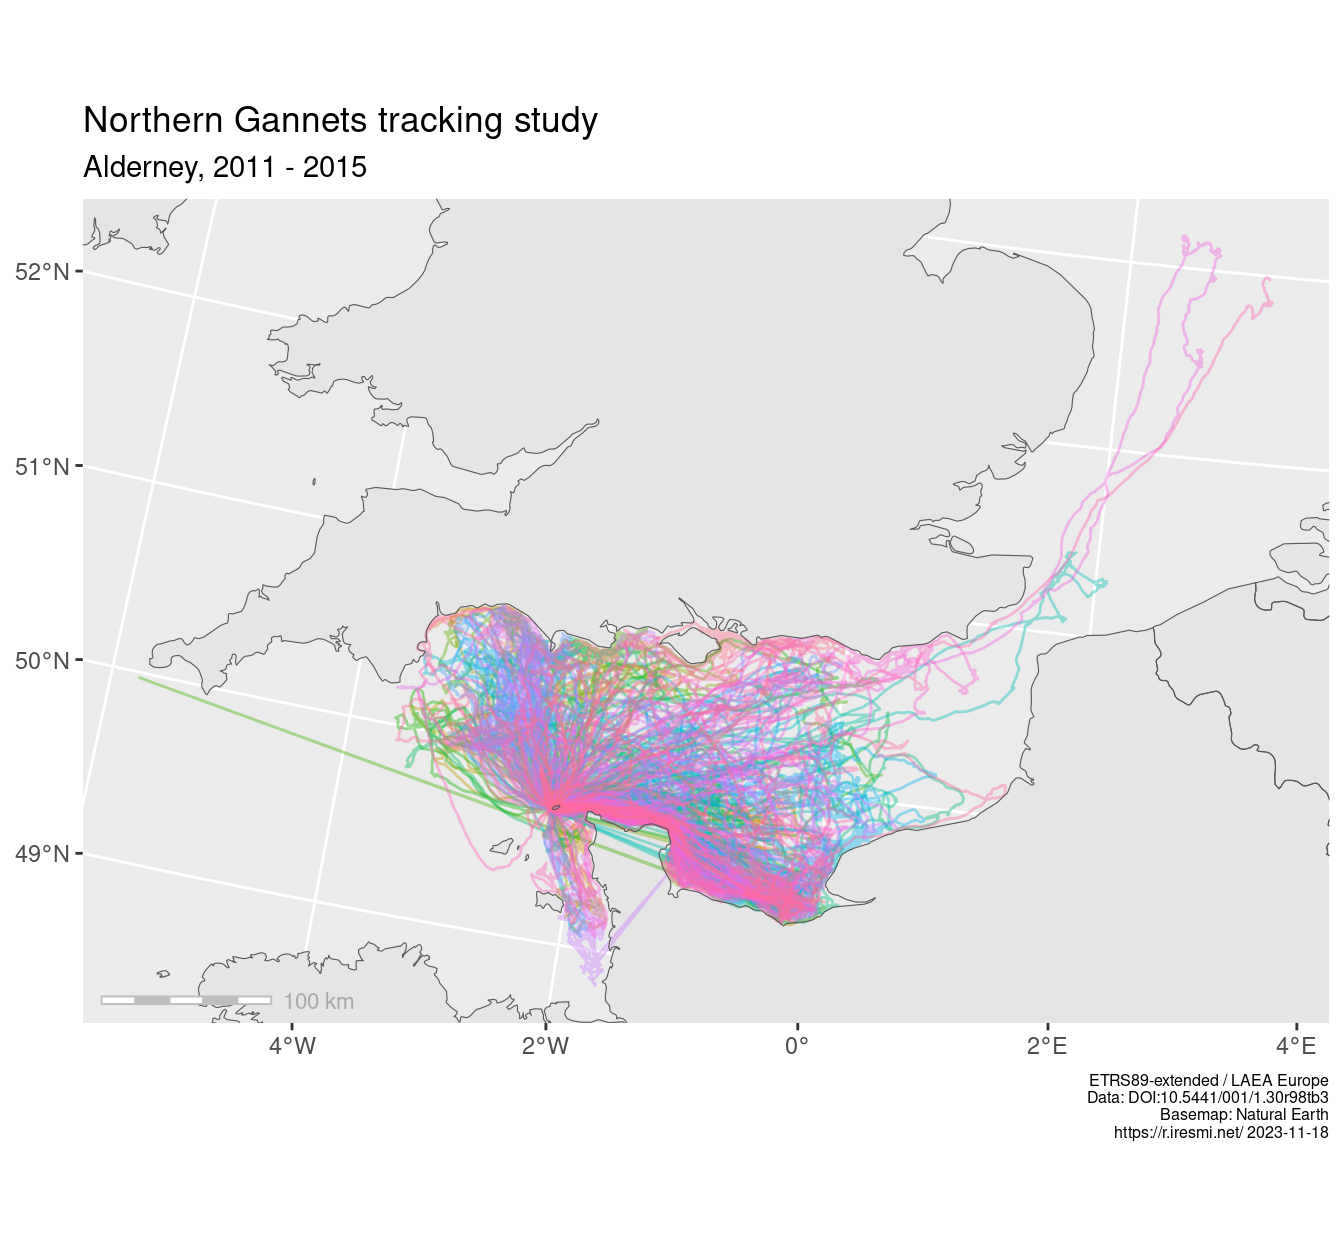 Map of Northern Gannets from Alderney